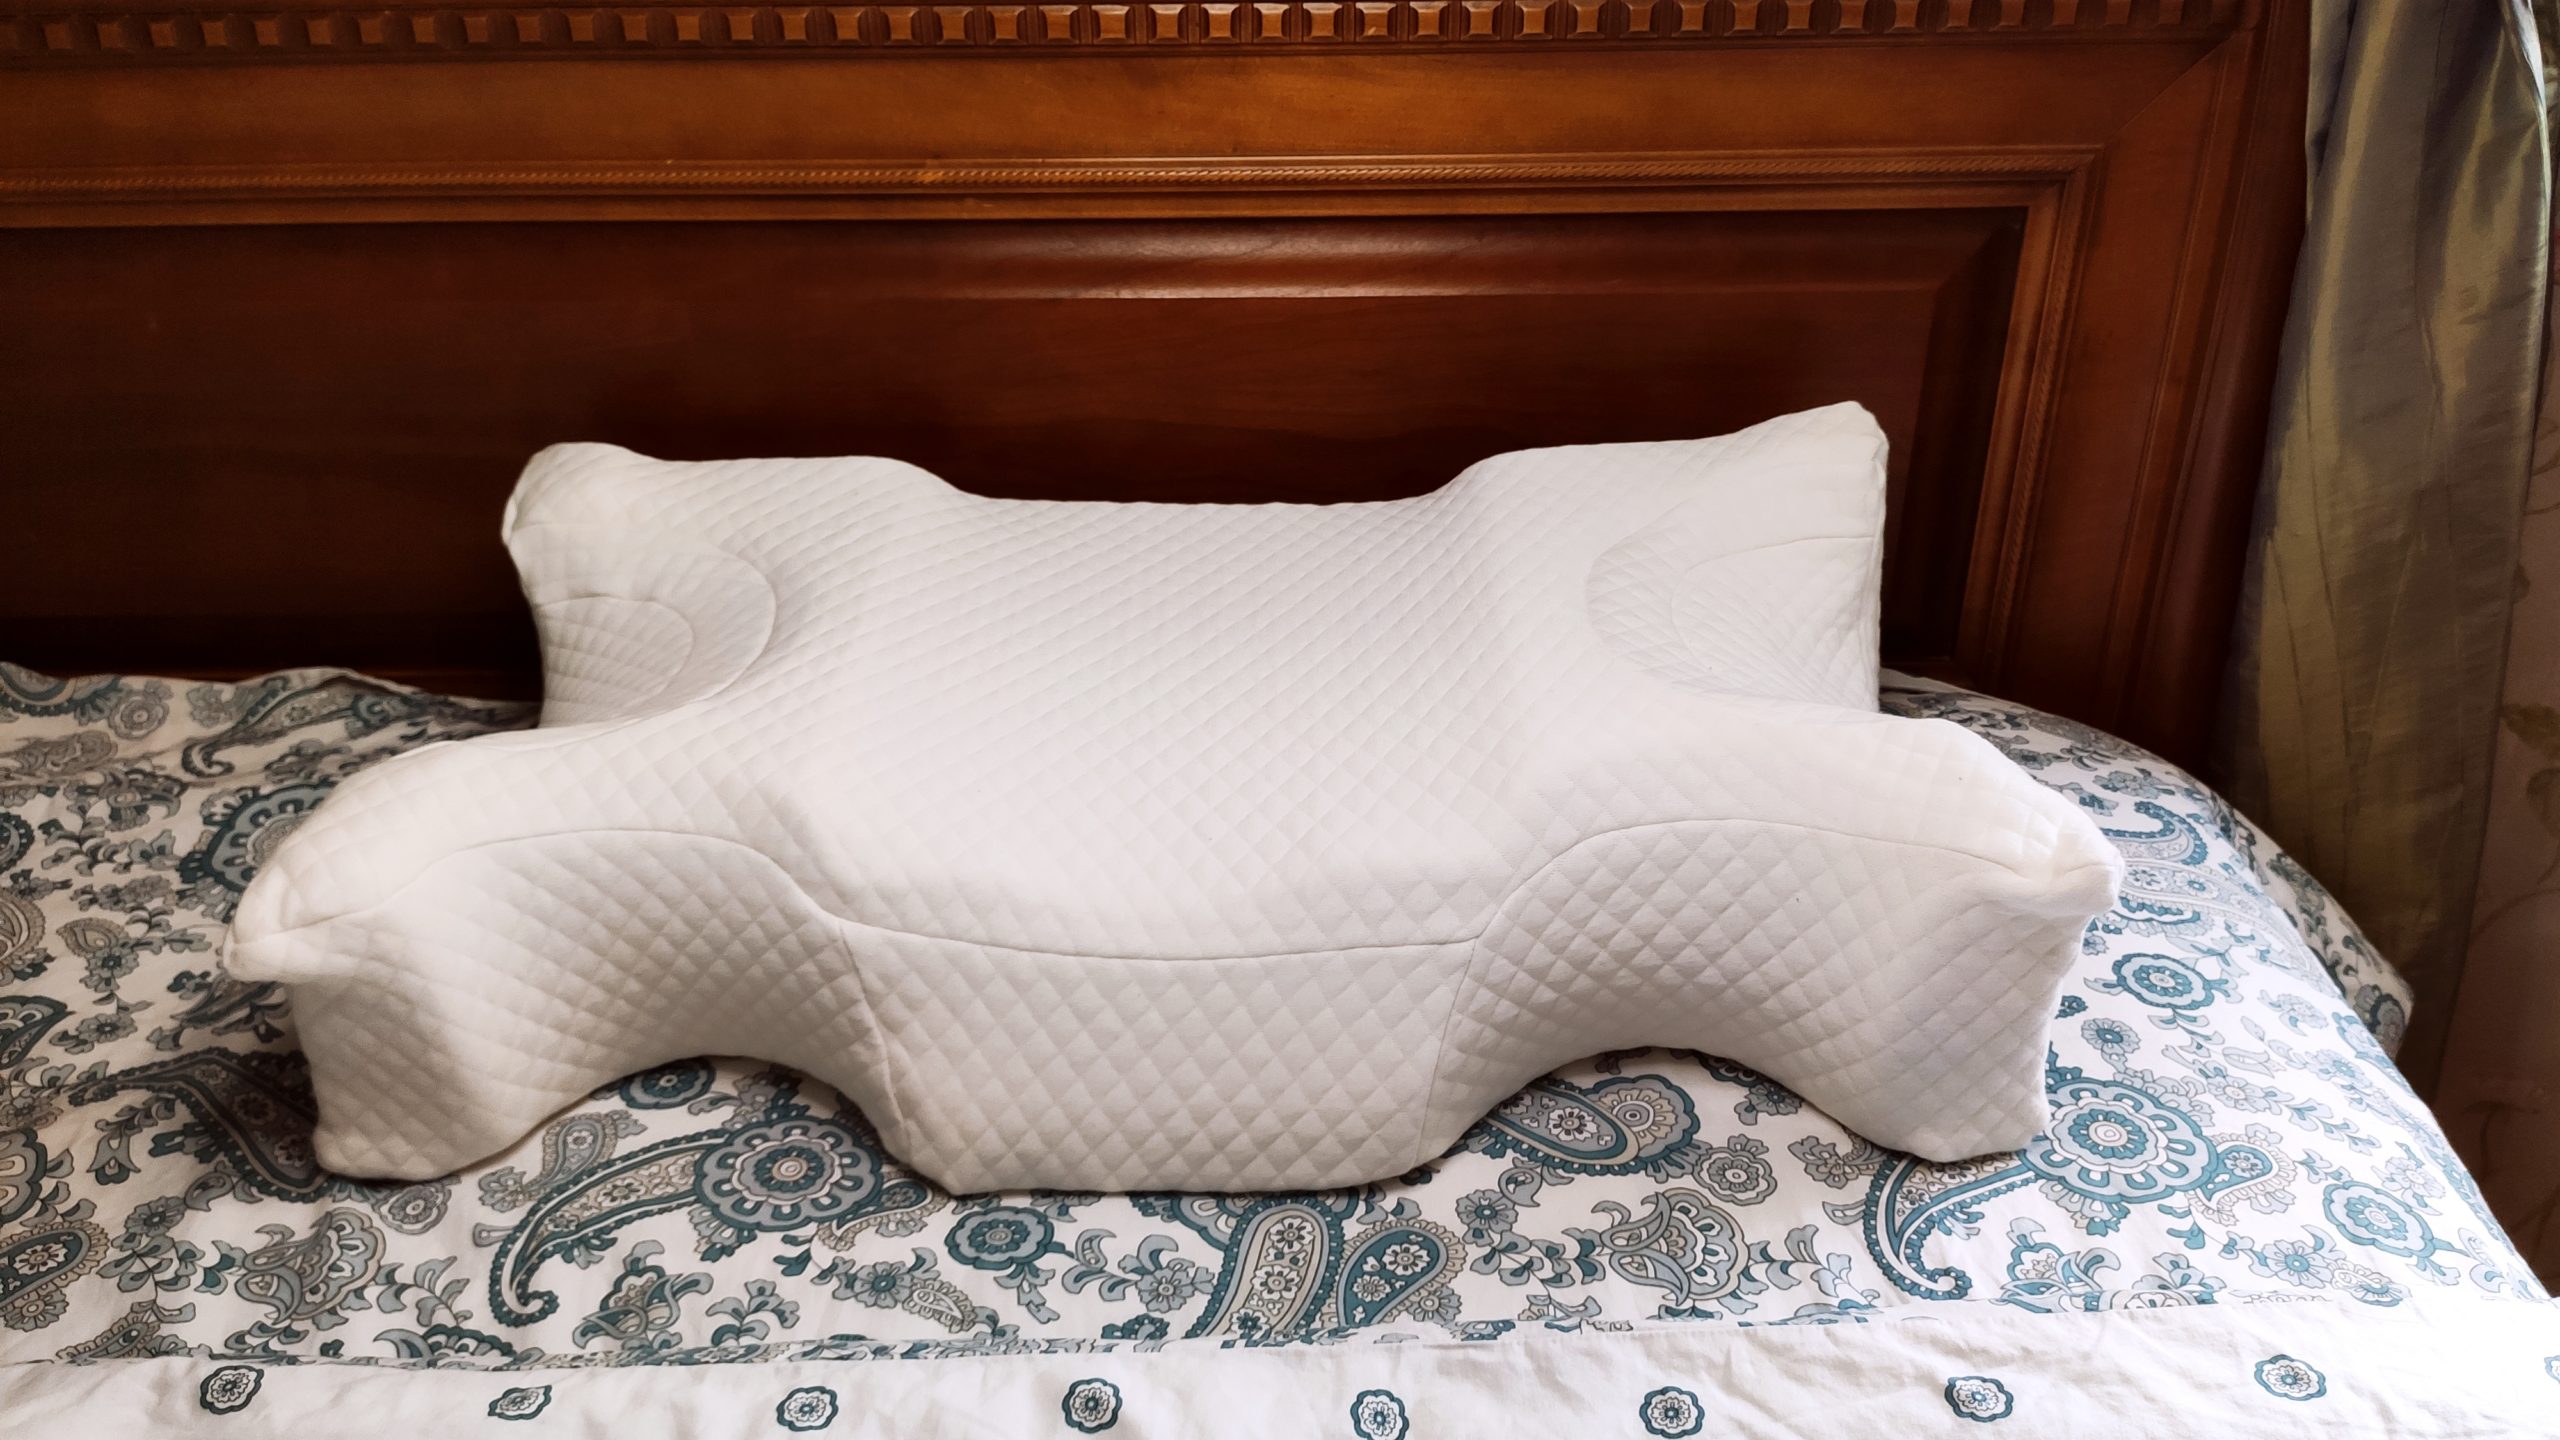 Let's not leave old age a chance - a review of the LoliDream anti-wrinkle pillow